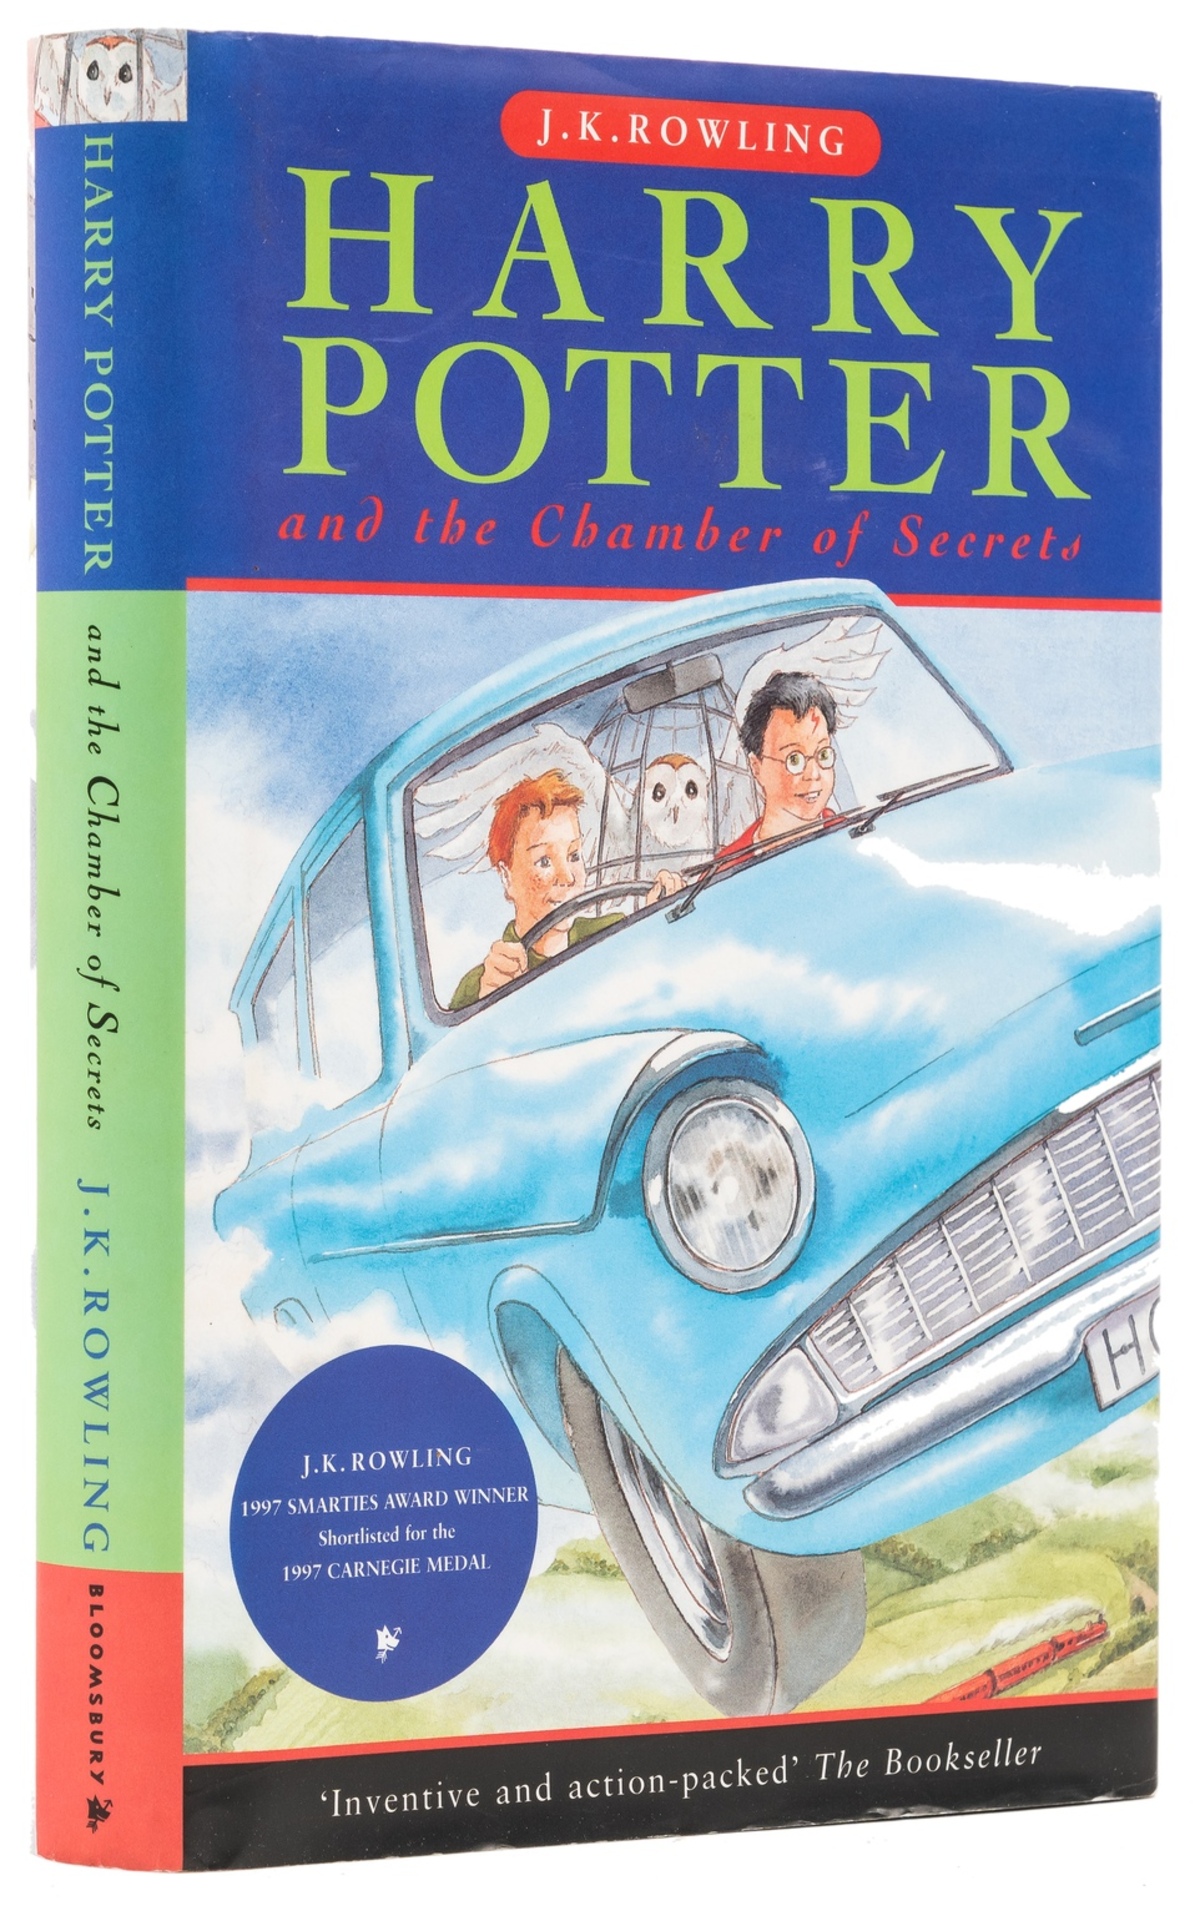 Rowling (J.K.) Harry Potter and the Chamber of Secrets, first edition, signed by the author, …